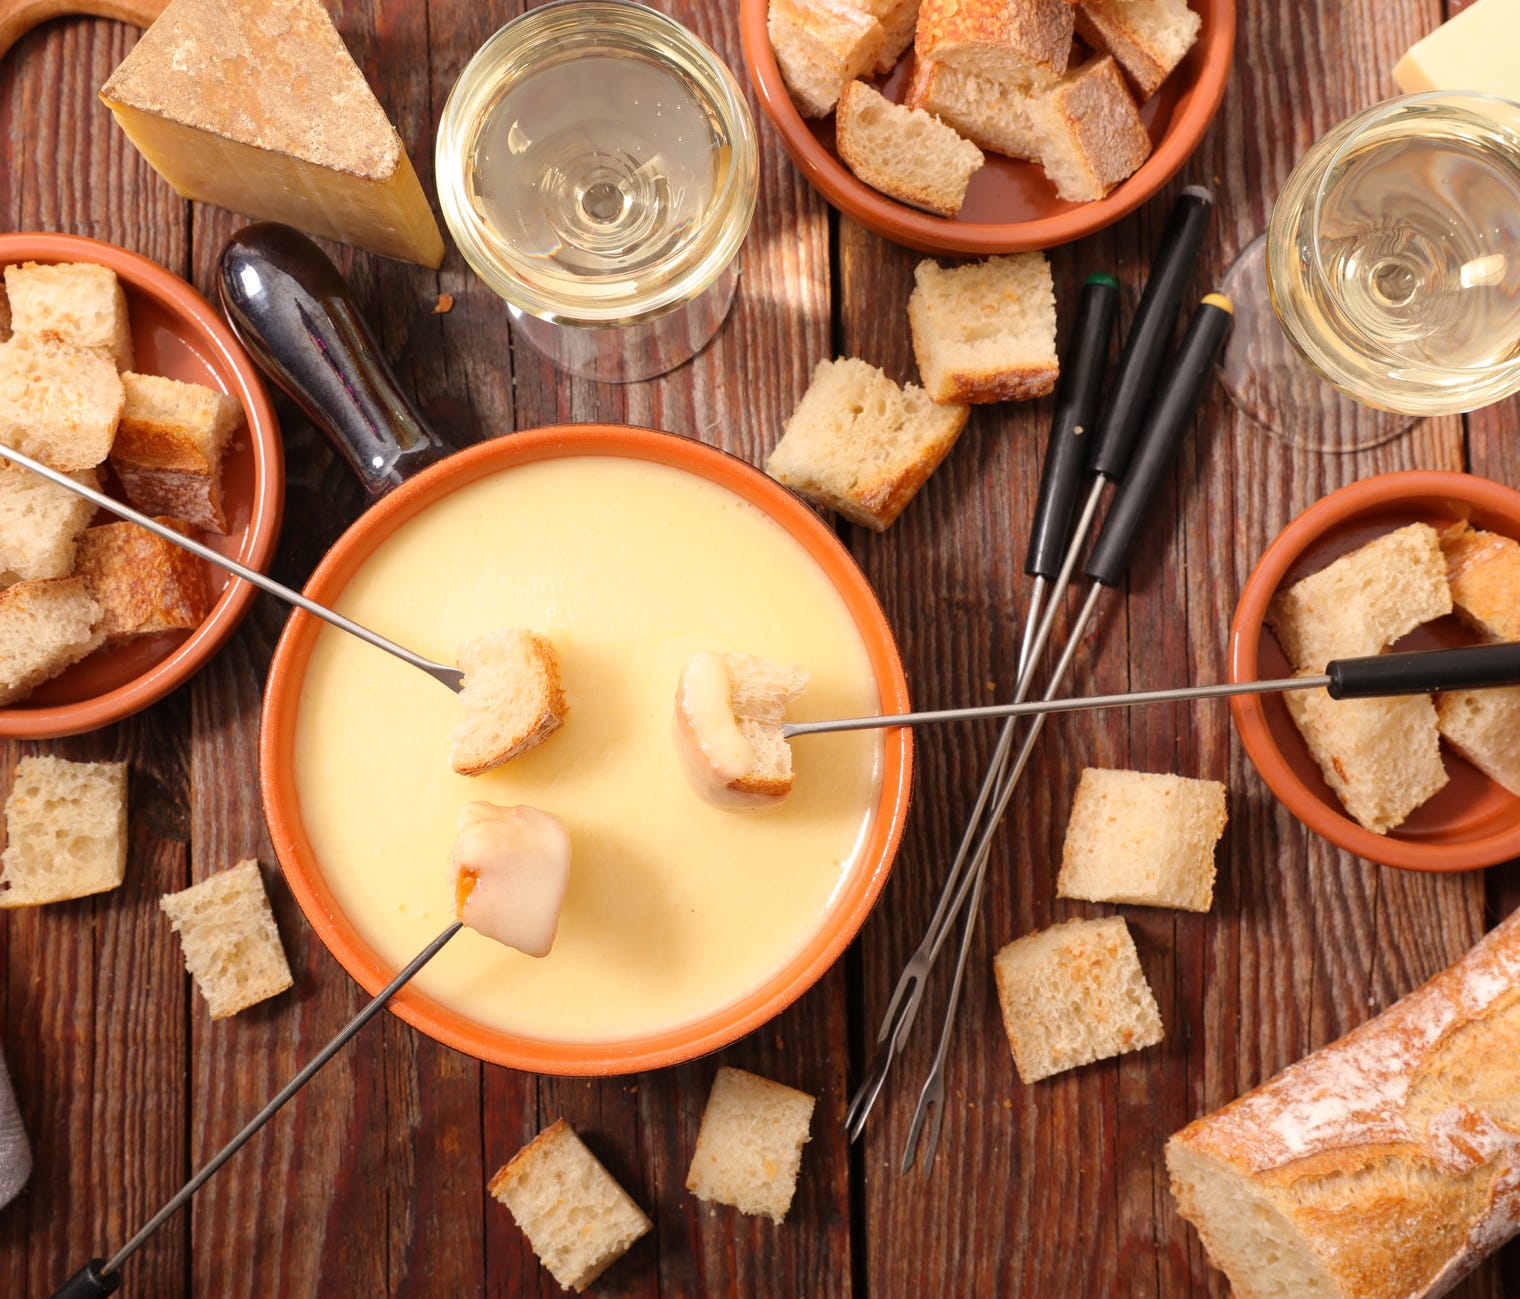 Fondue (Switzerland): Is there anything more glorious on a cold day than a literal pot of melted cheese? Not according to Switzerland, which is where fondue was invented, supposedly as a way for peasants to use up aged cheese and stale bread. Althoug